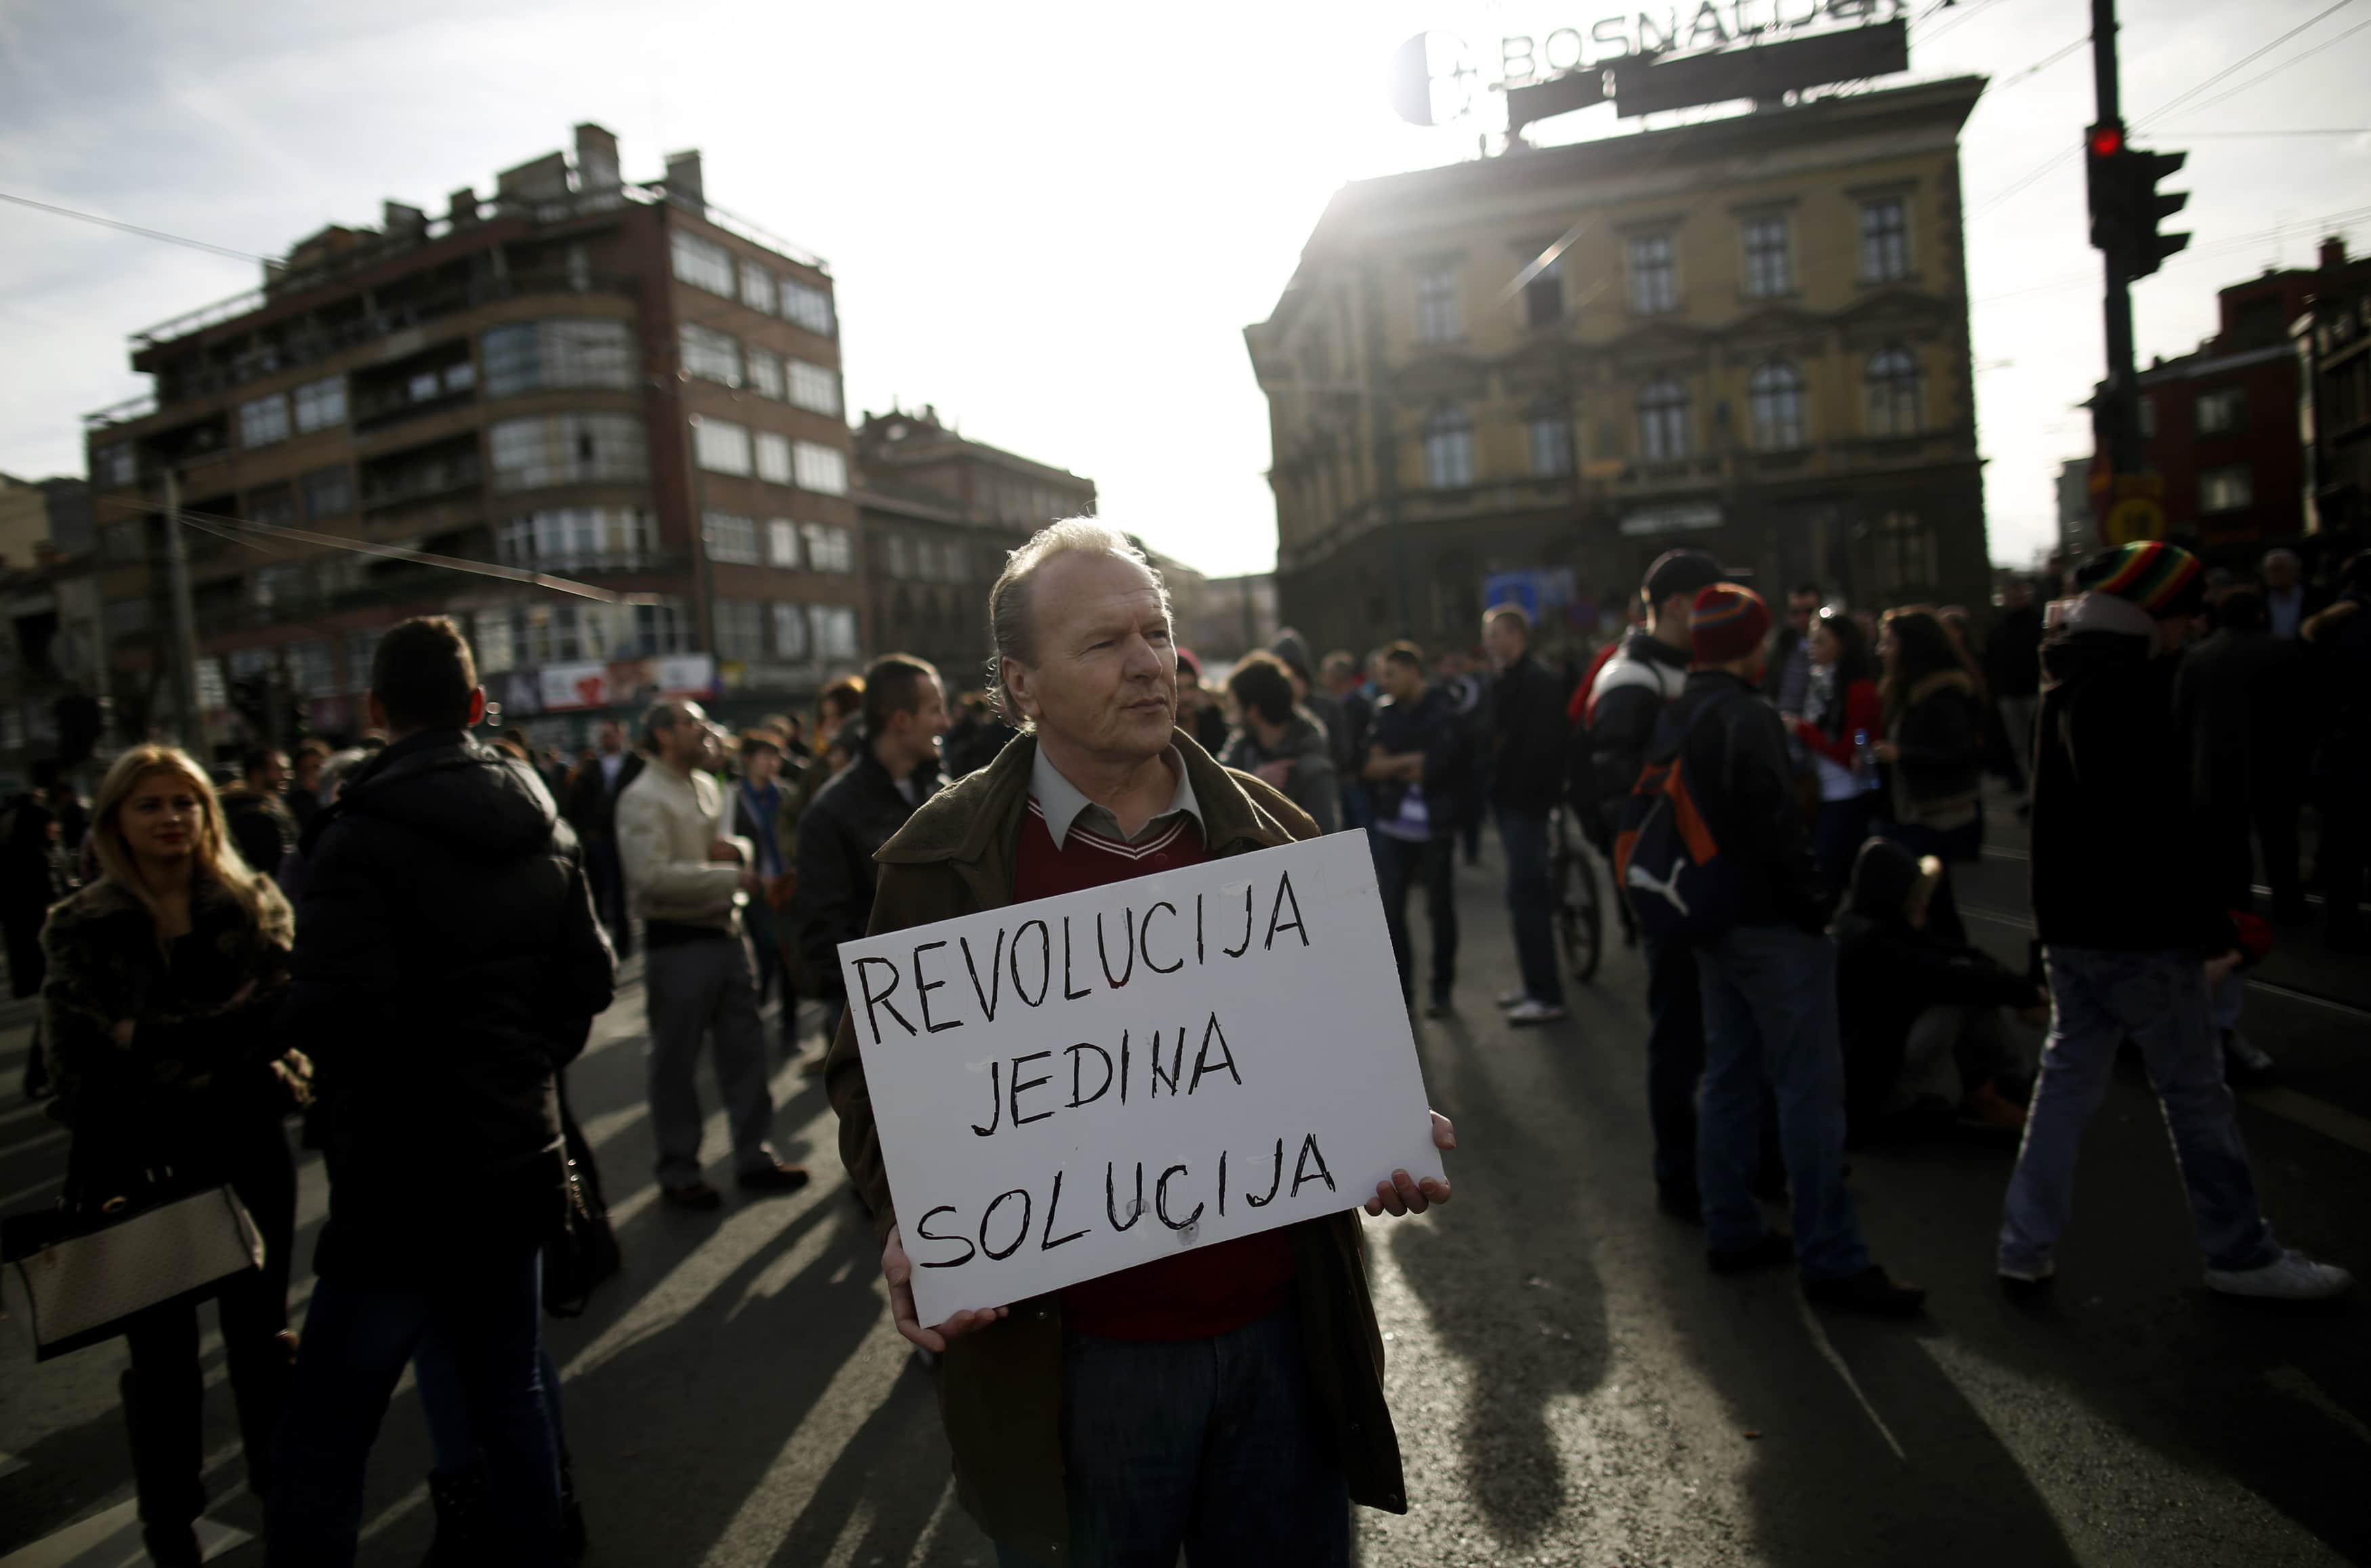 An anti-government protester holds a placard that reads "Revolution is the only solution" as protesters block Alipasina street during protests in Sarajevo, 11 February 2014., REUTERS/Dado Ruvic